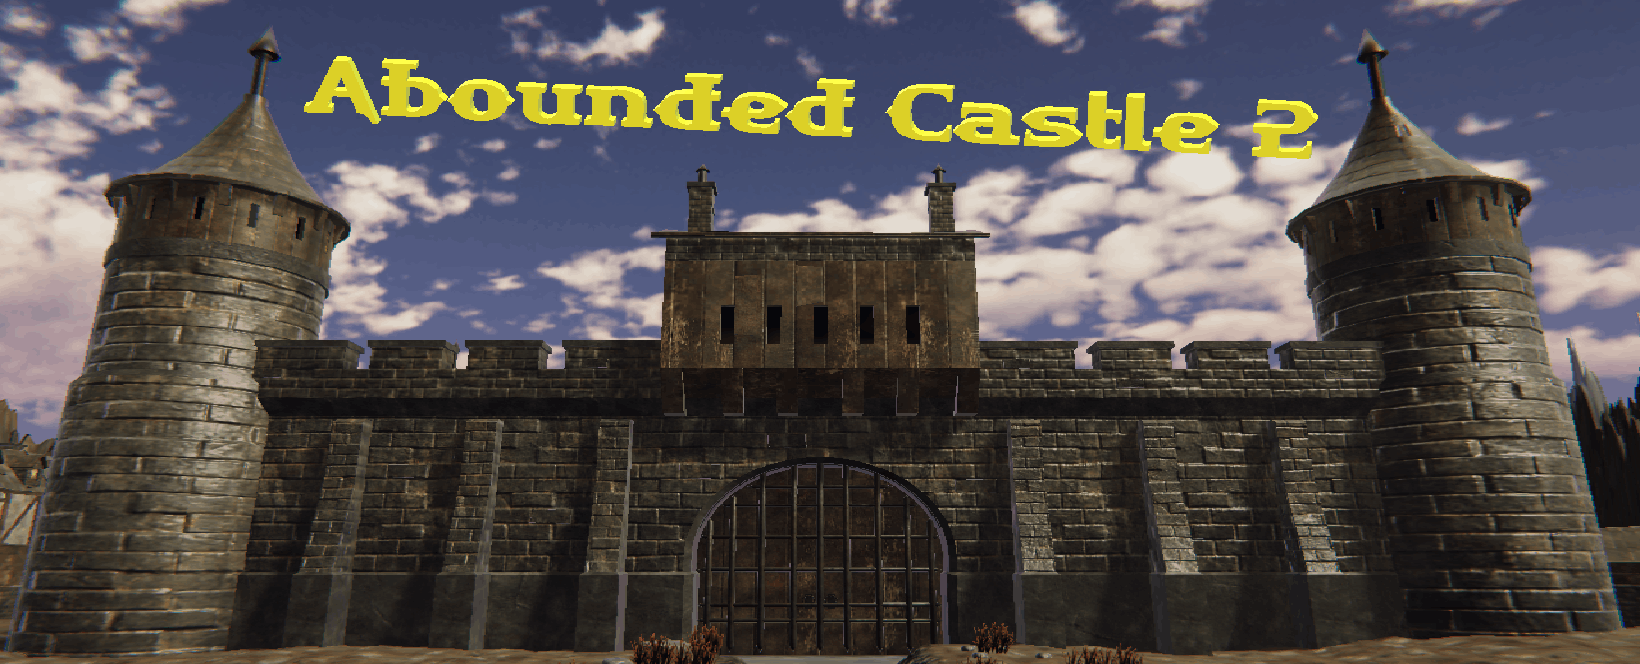 Abounded Castle 2